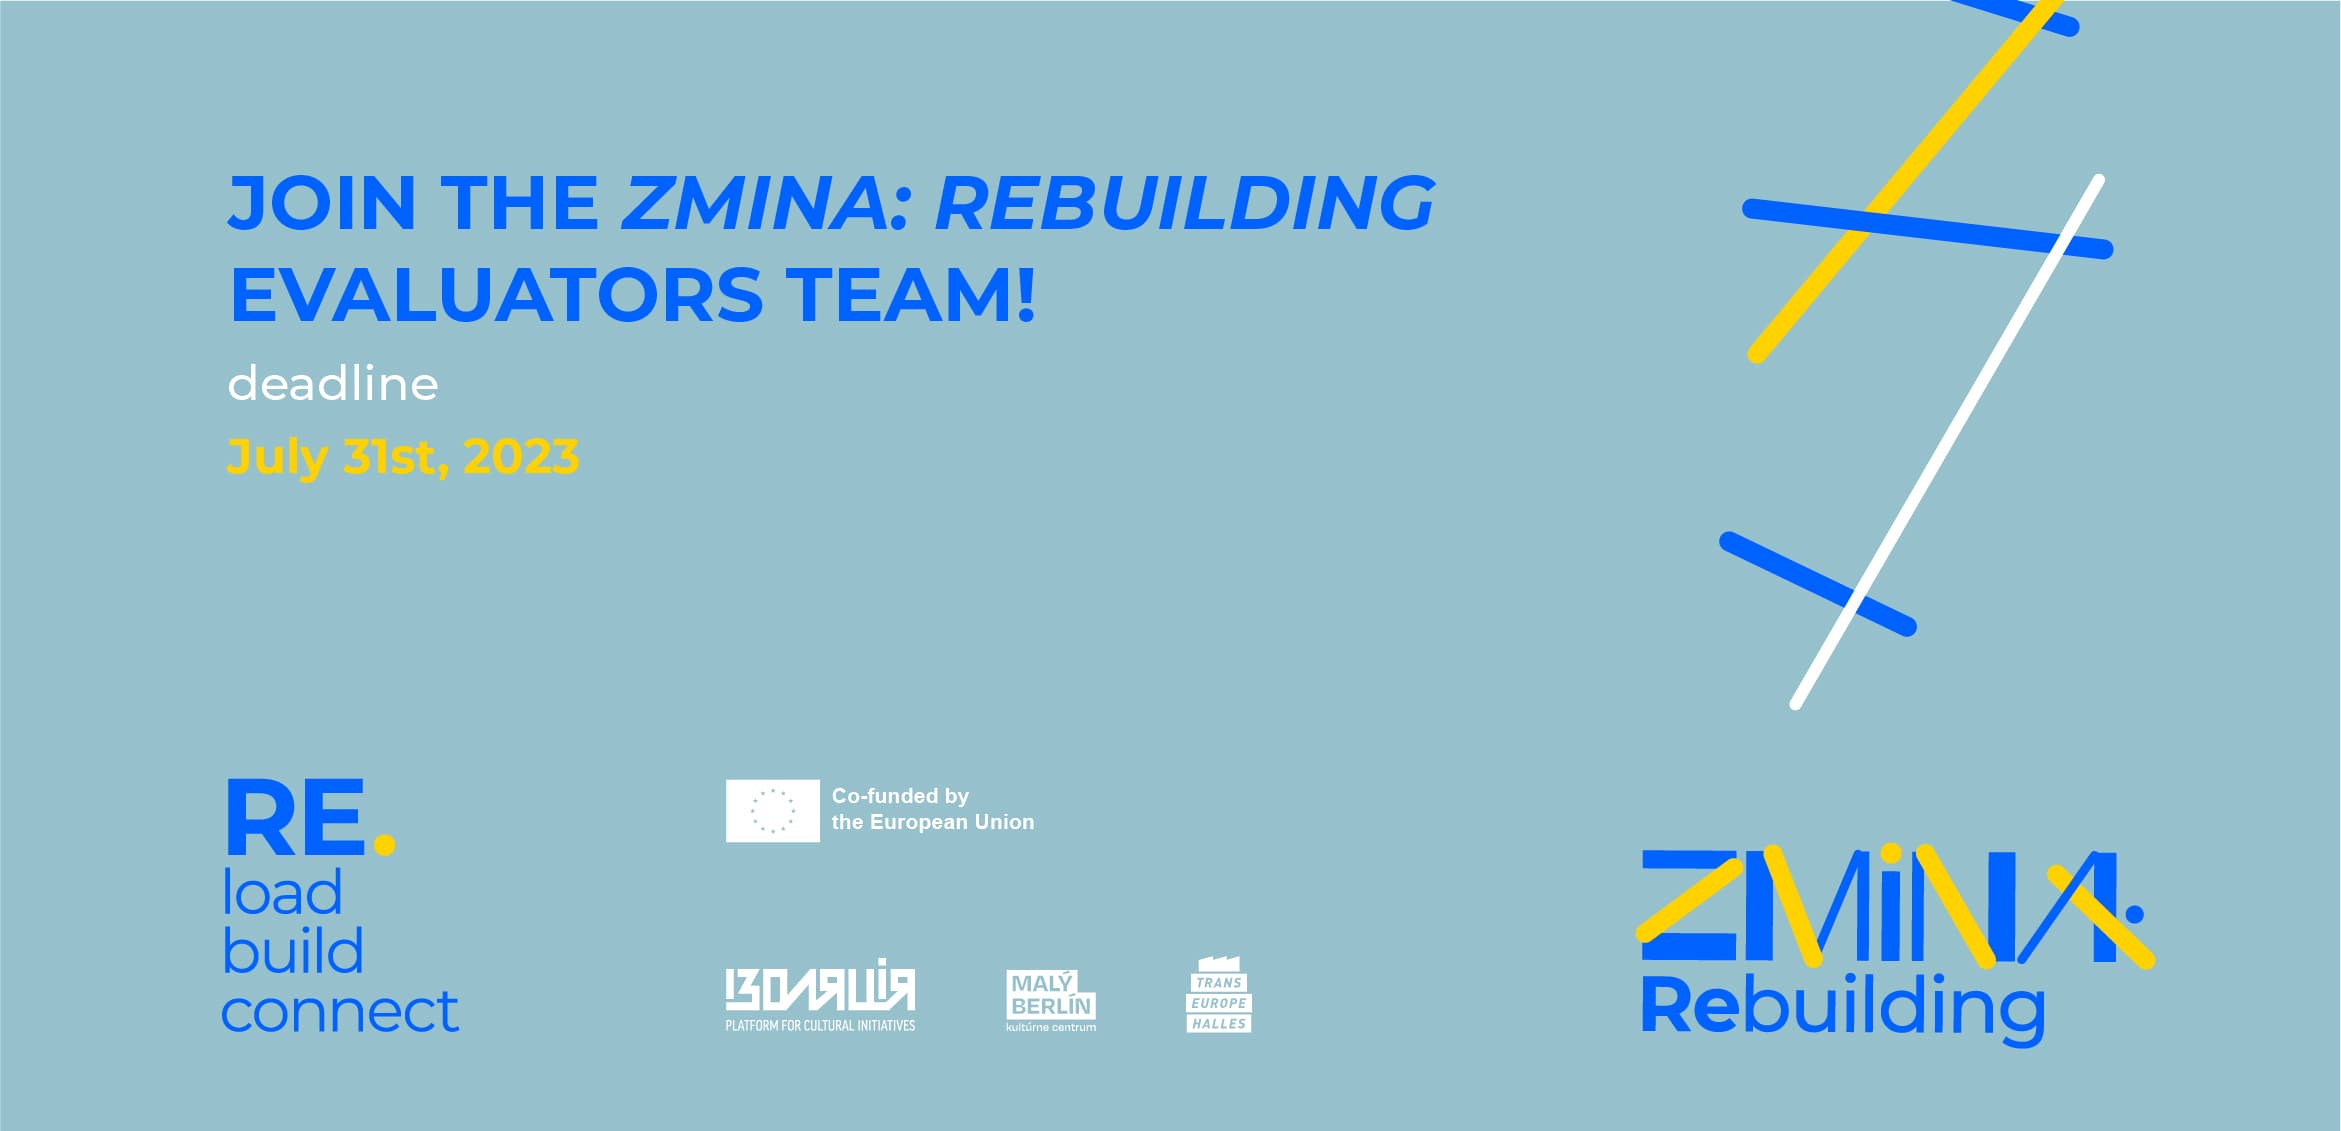 Call for experts to join the ZMINA: Rebuilding evaluators team